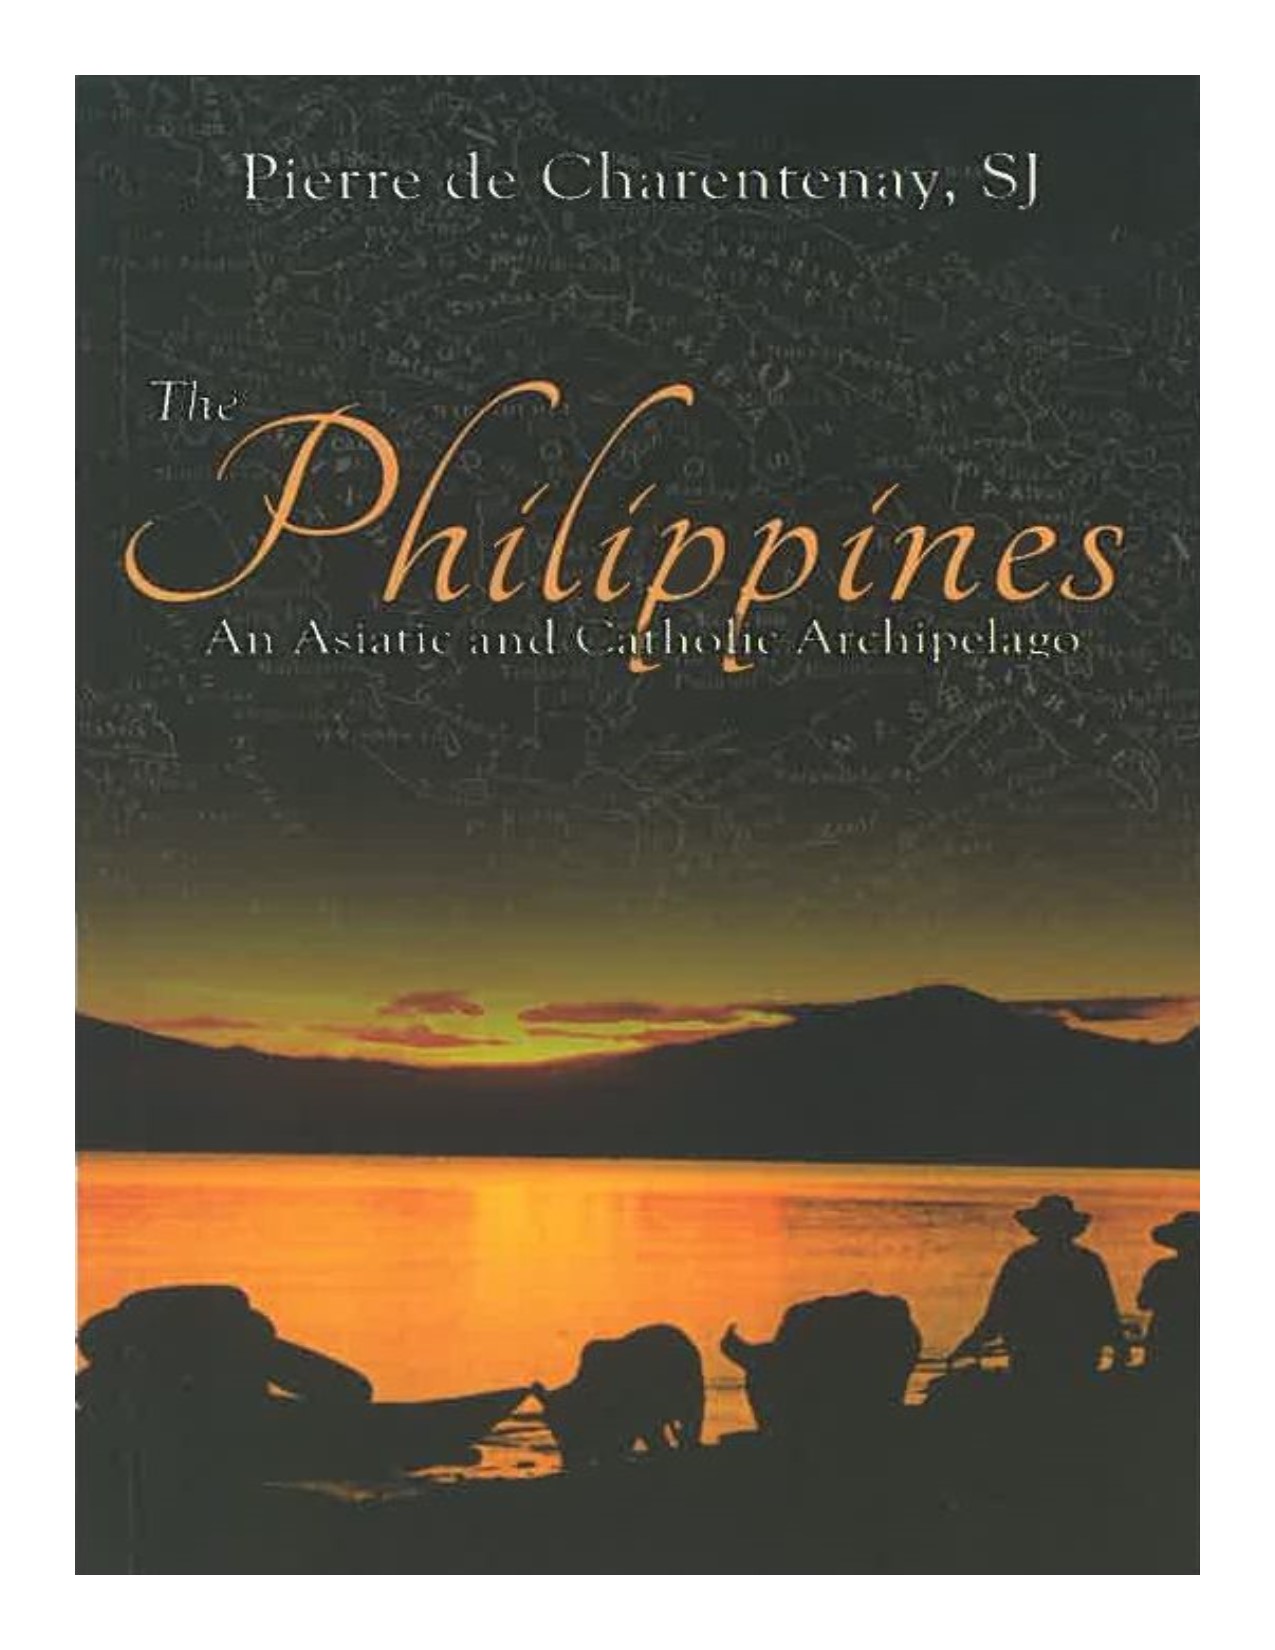 The Philippines an Asiatic and Catholic archipelago